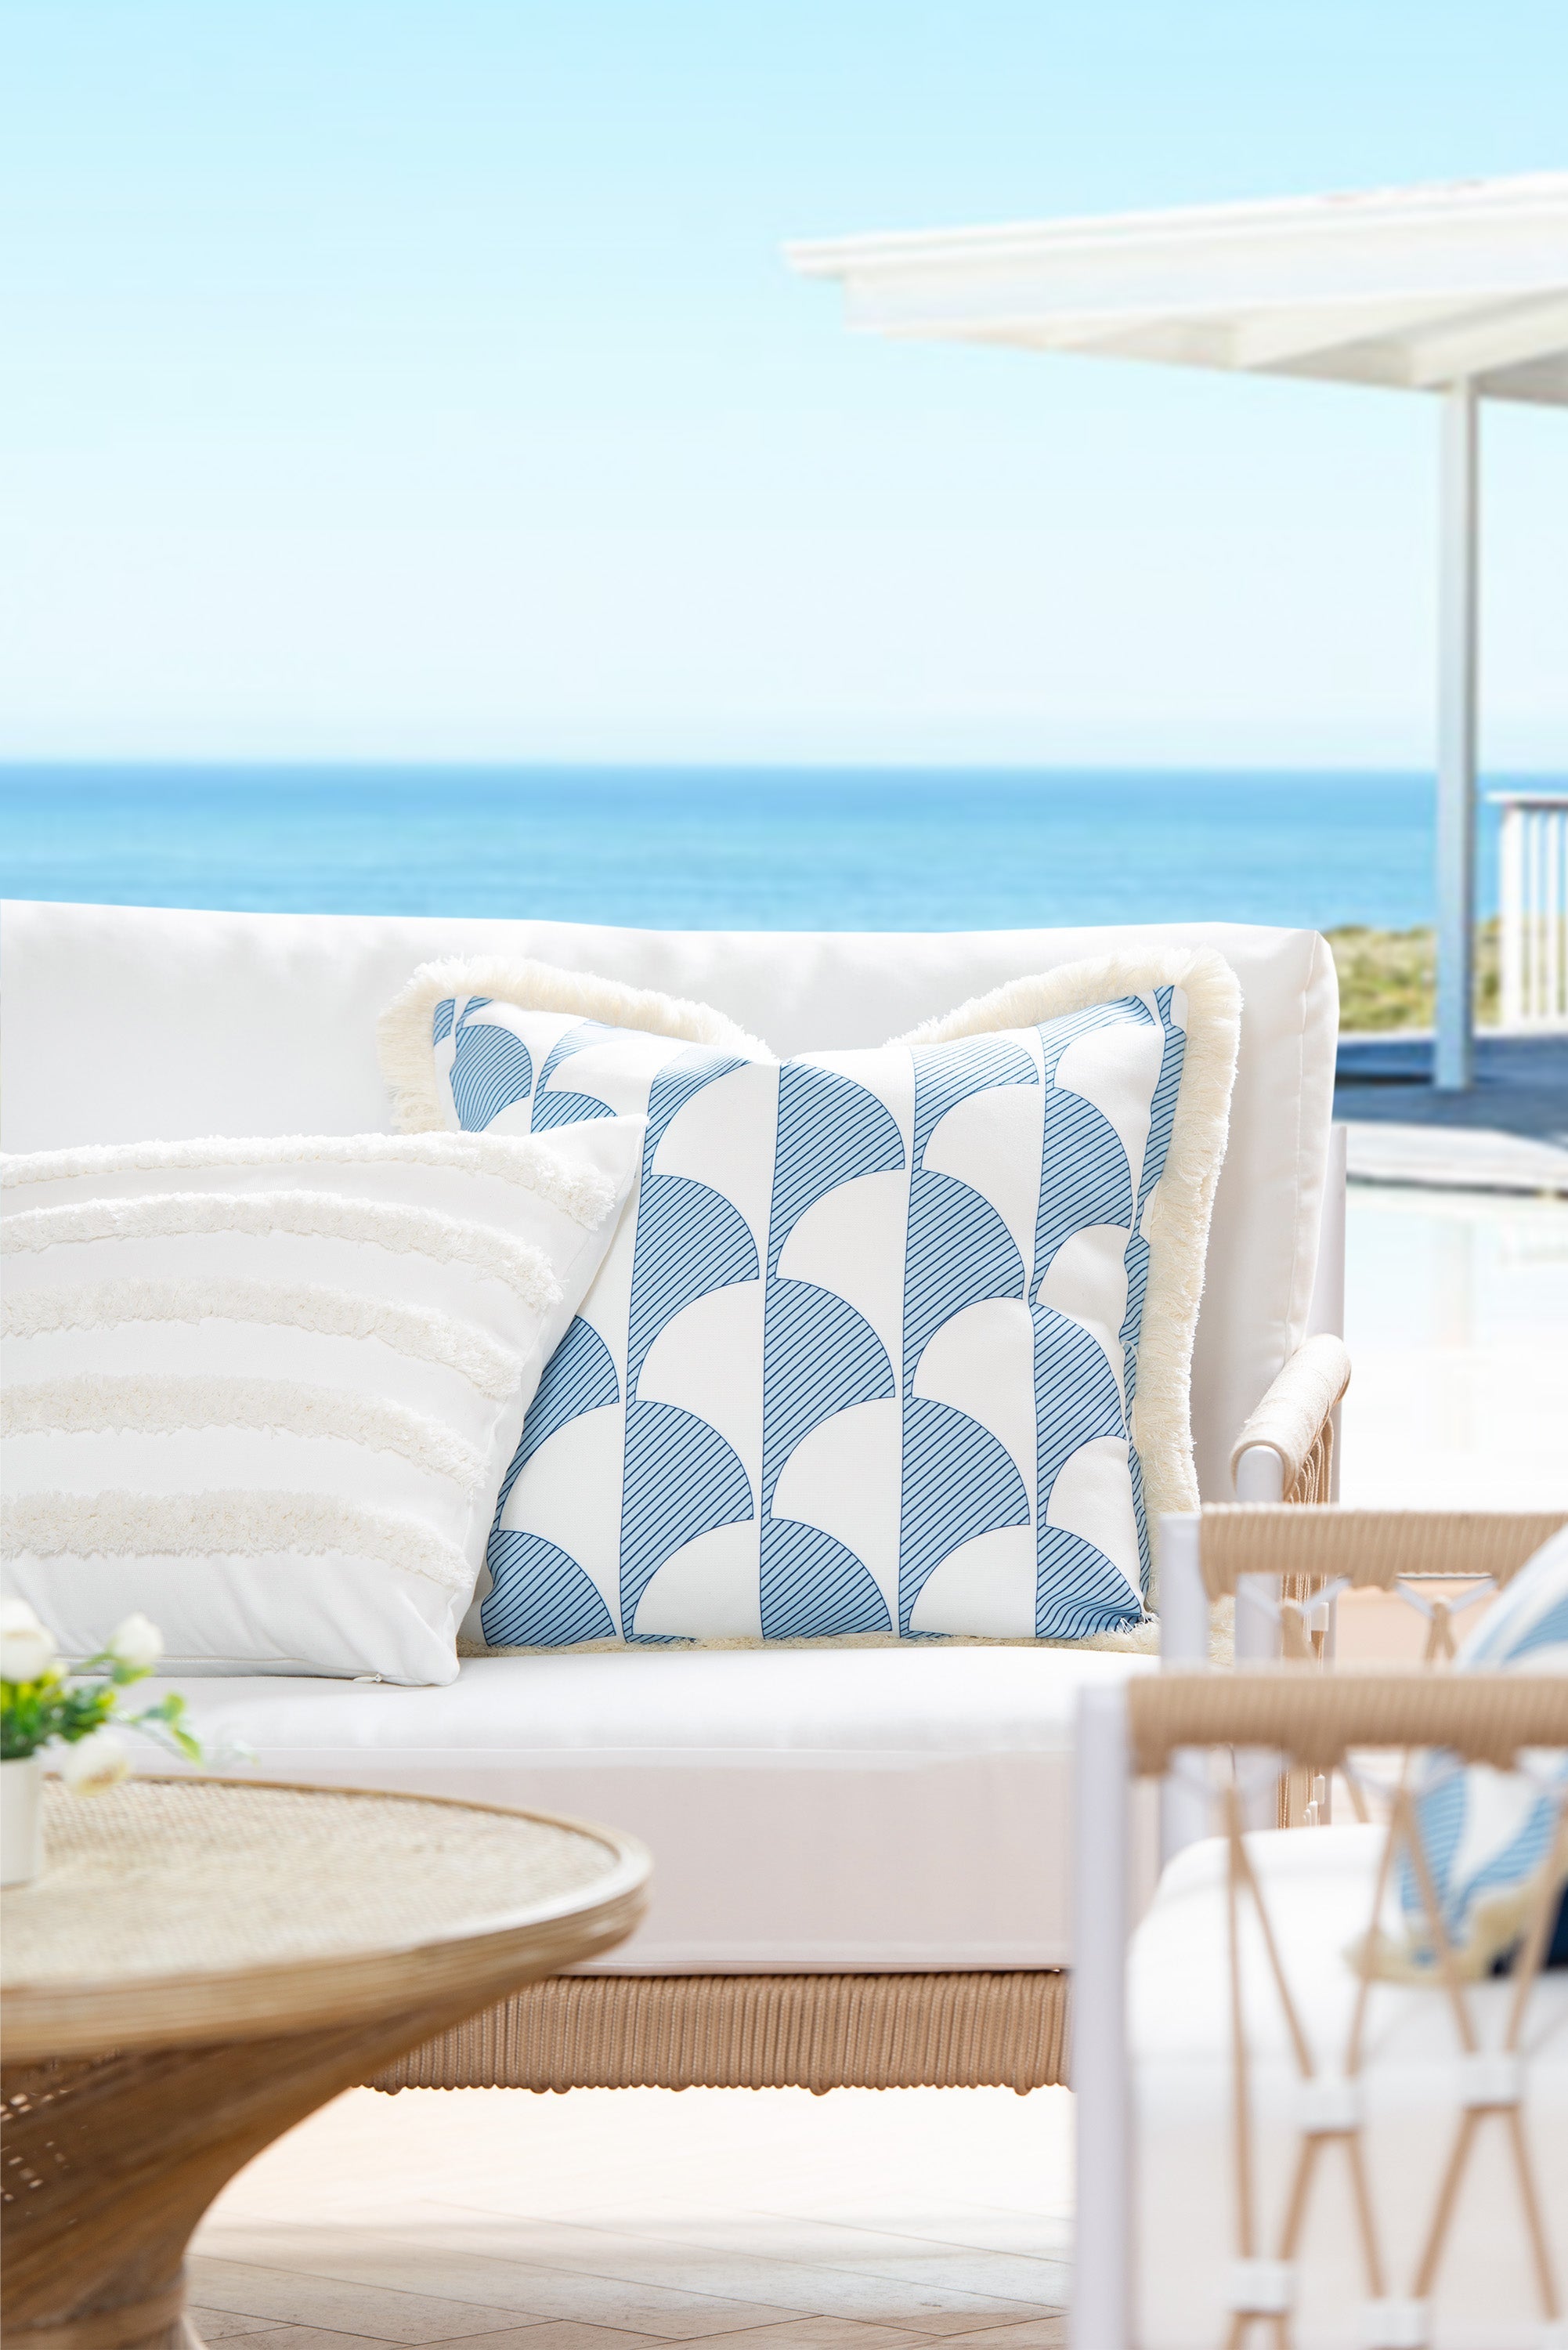 Coastal Hampton Style Indoor Outdoor Pillow Cover, Scale Motif Fringe, Baby Blue, 20"x20"